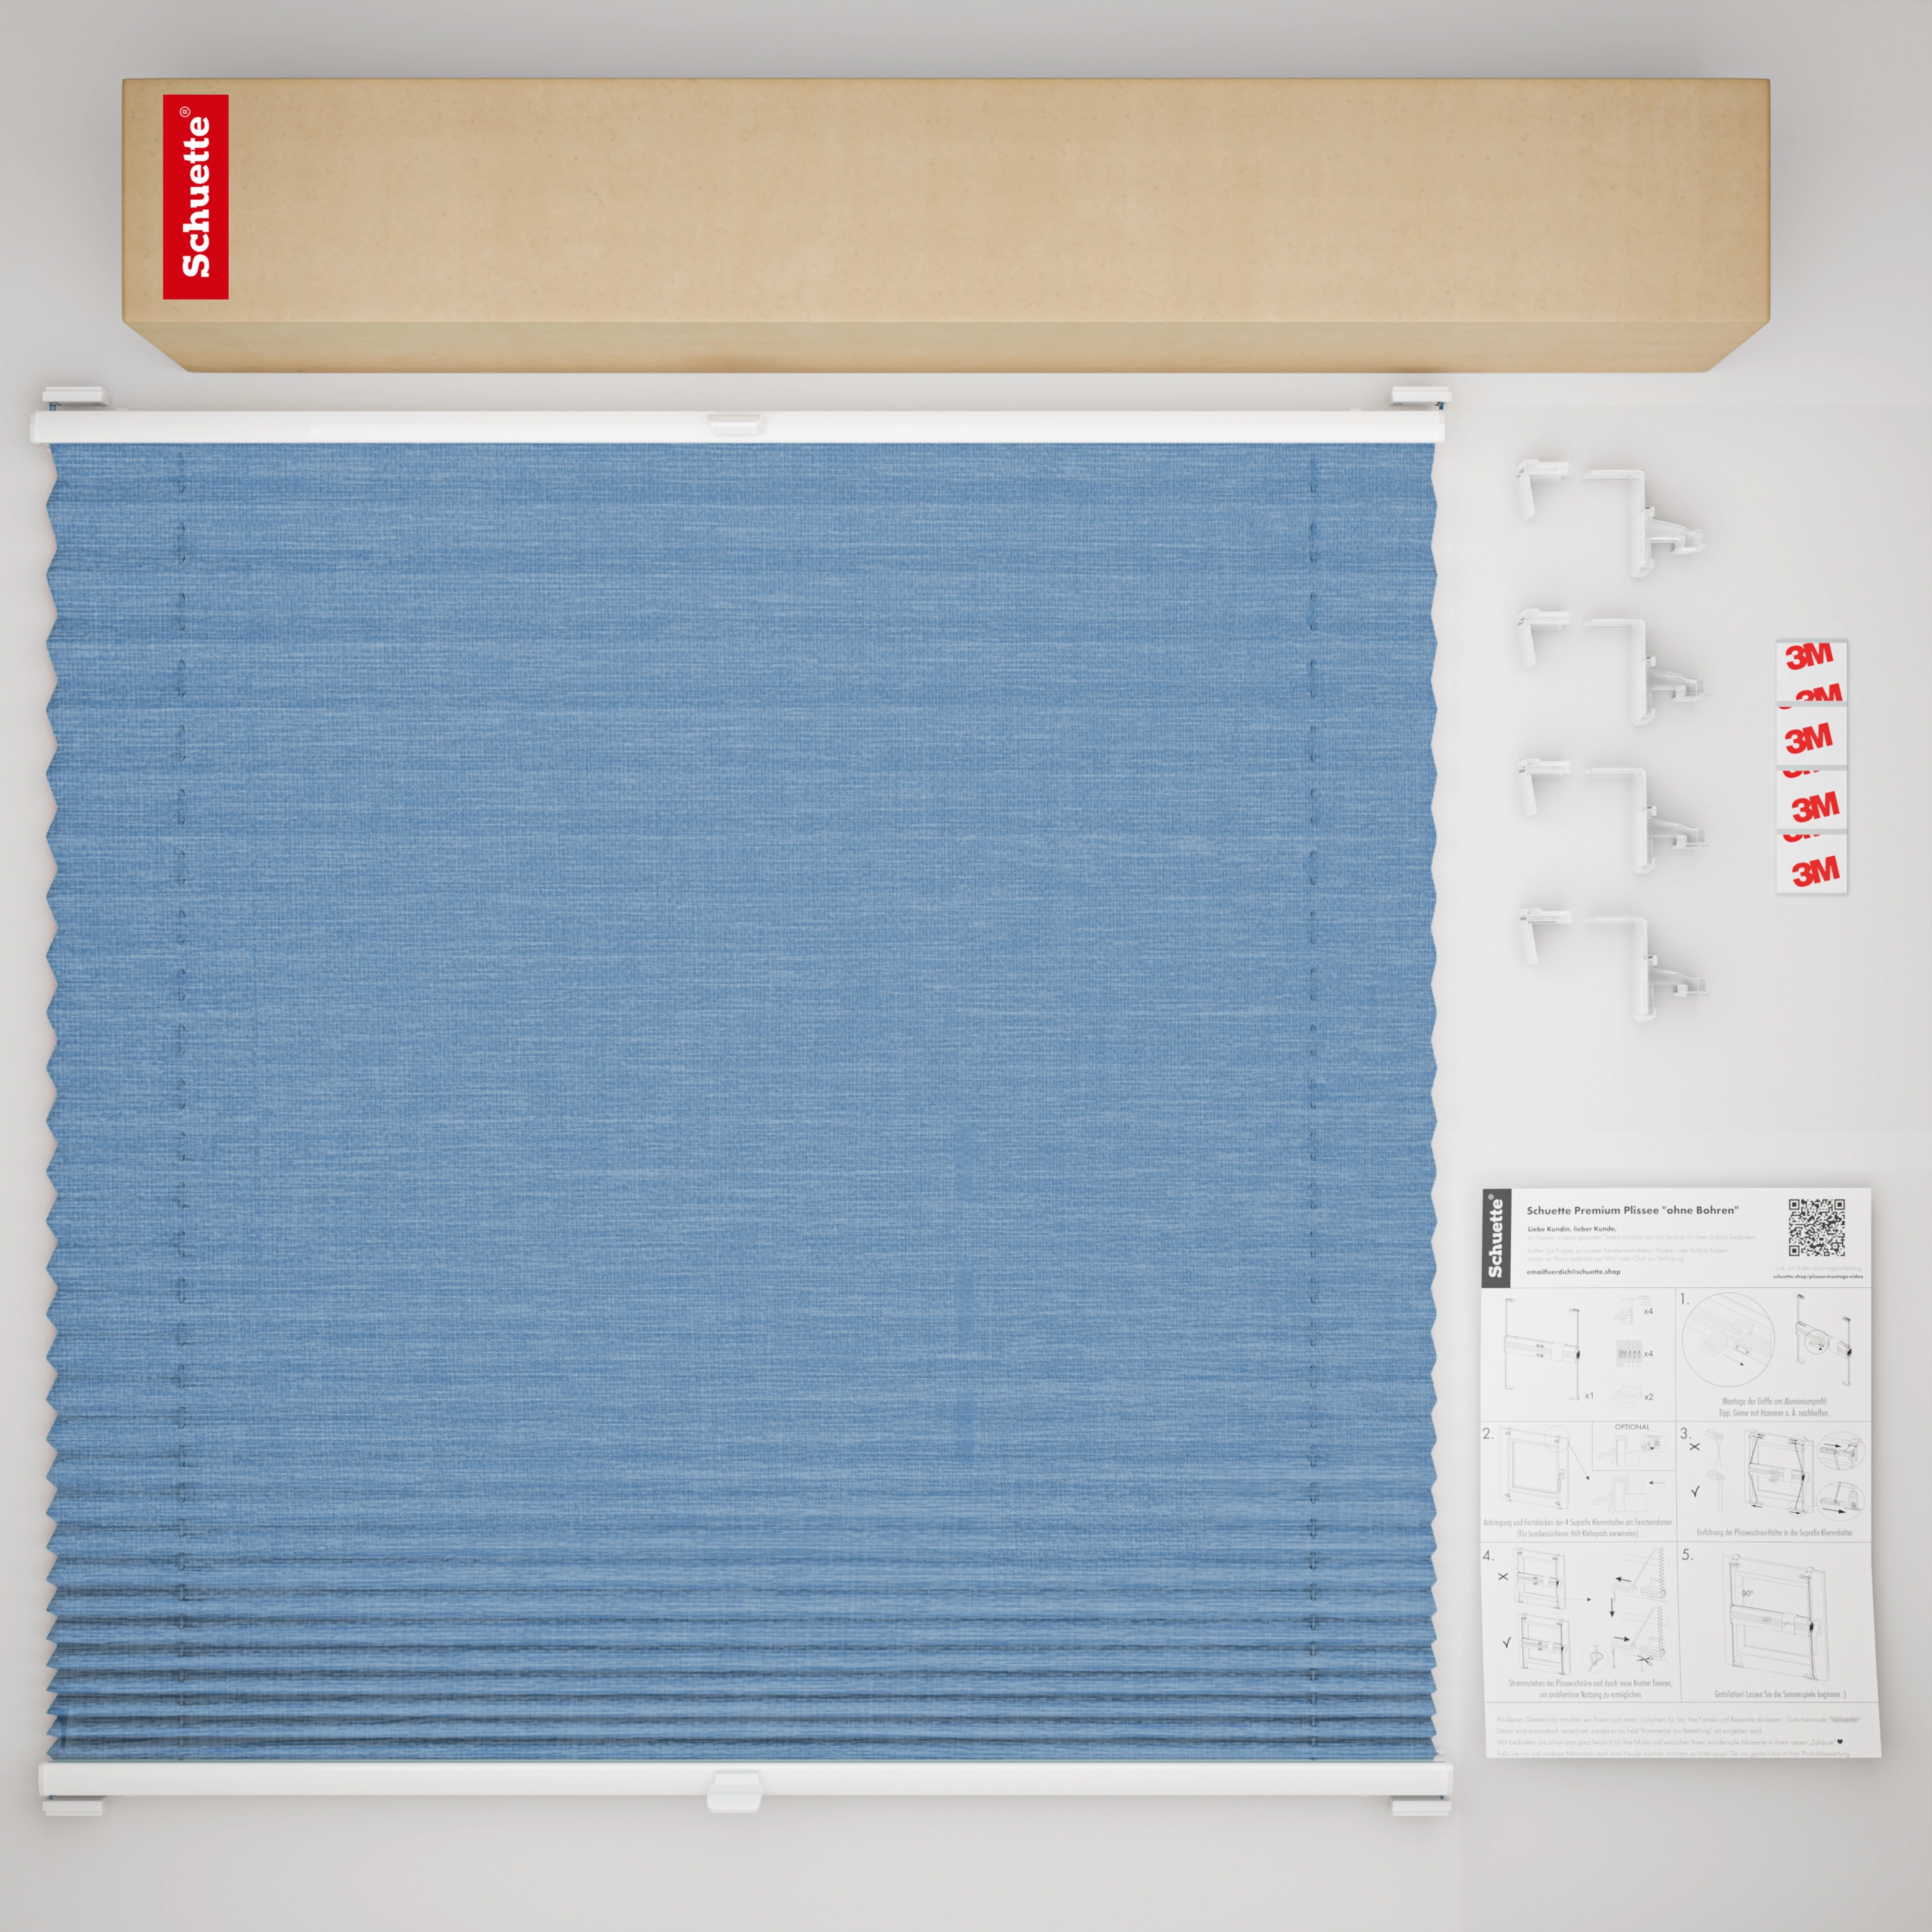 Schuette® Pleated Blind Made to Measure without Drilling • Suprafix Clamp holder “Incognito" Standard” • Melange Collection: Deep Sea (Blue) • Profile Colour: White